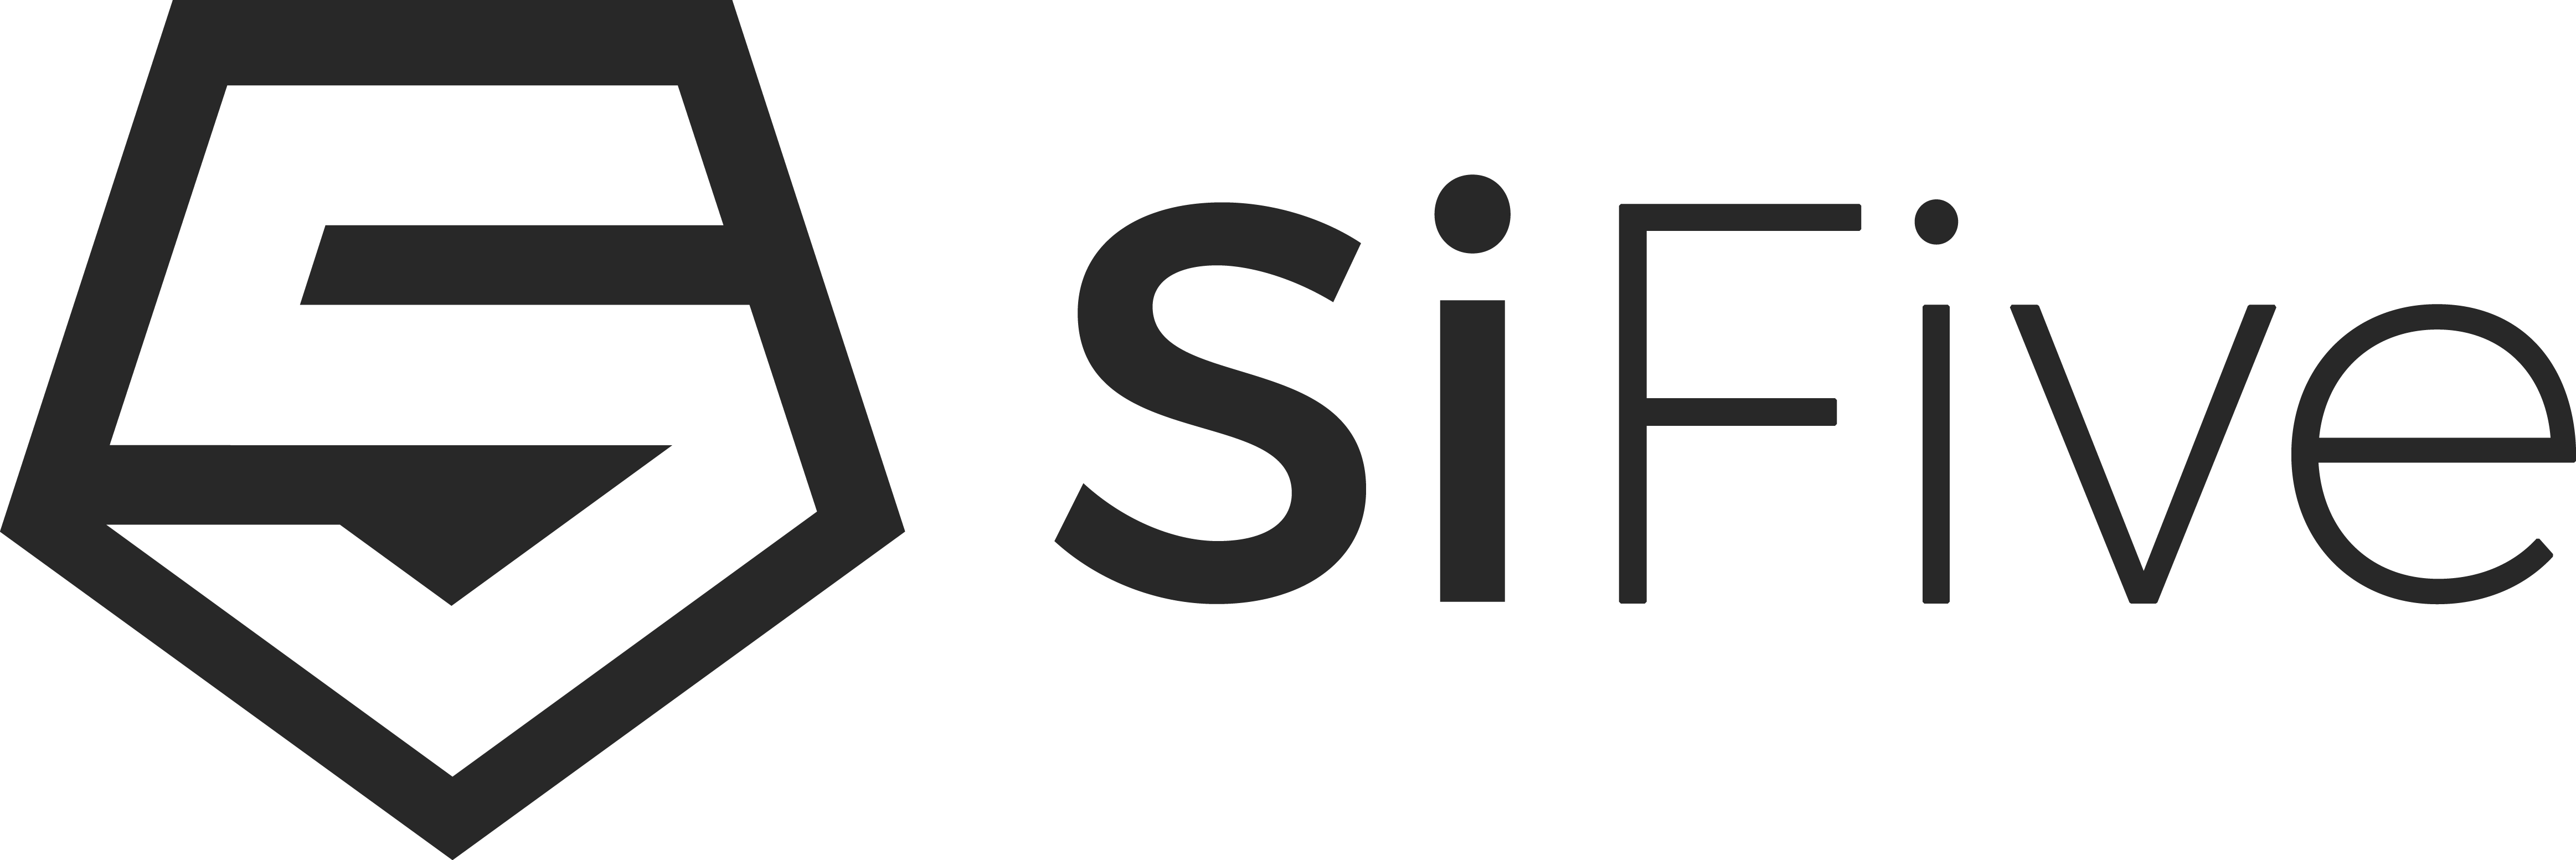 SiFive Partners with Intel to Spark Innovation in High-Performance RISC-V Platforms | SiFive